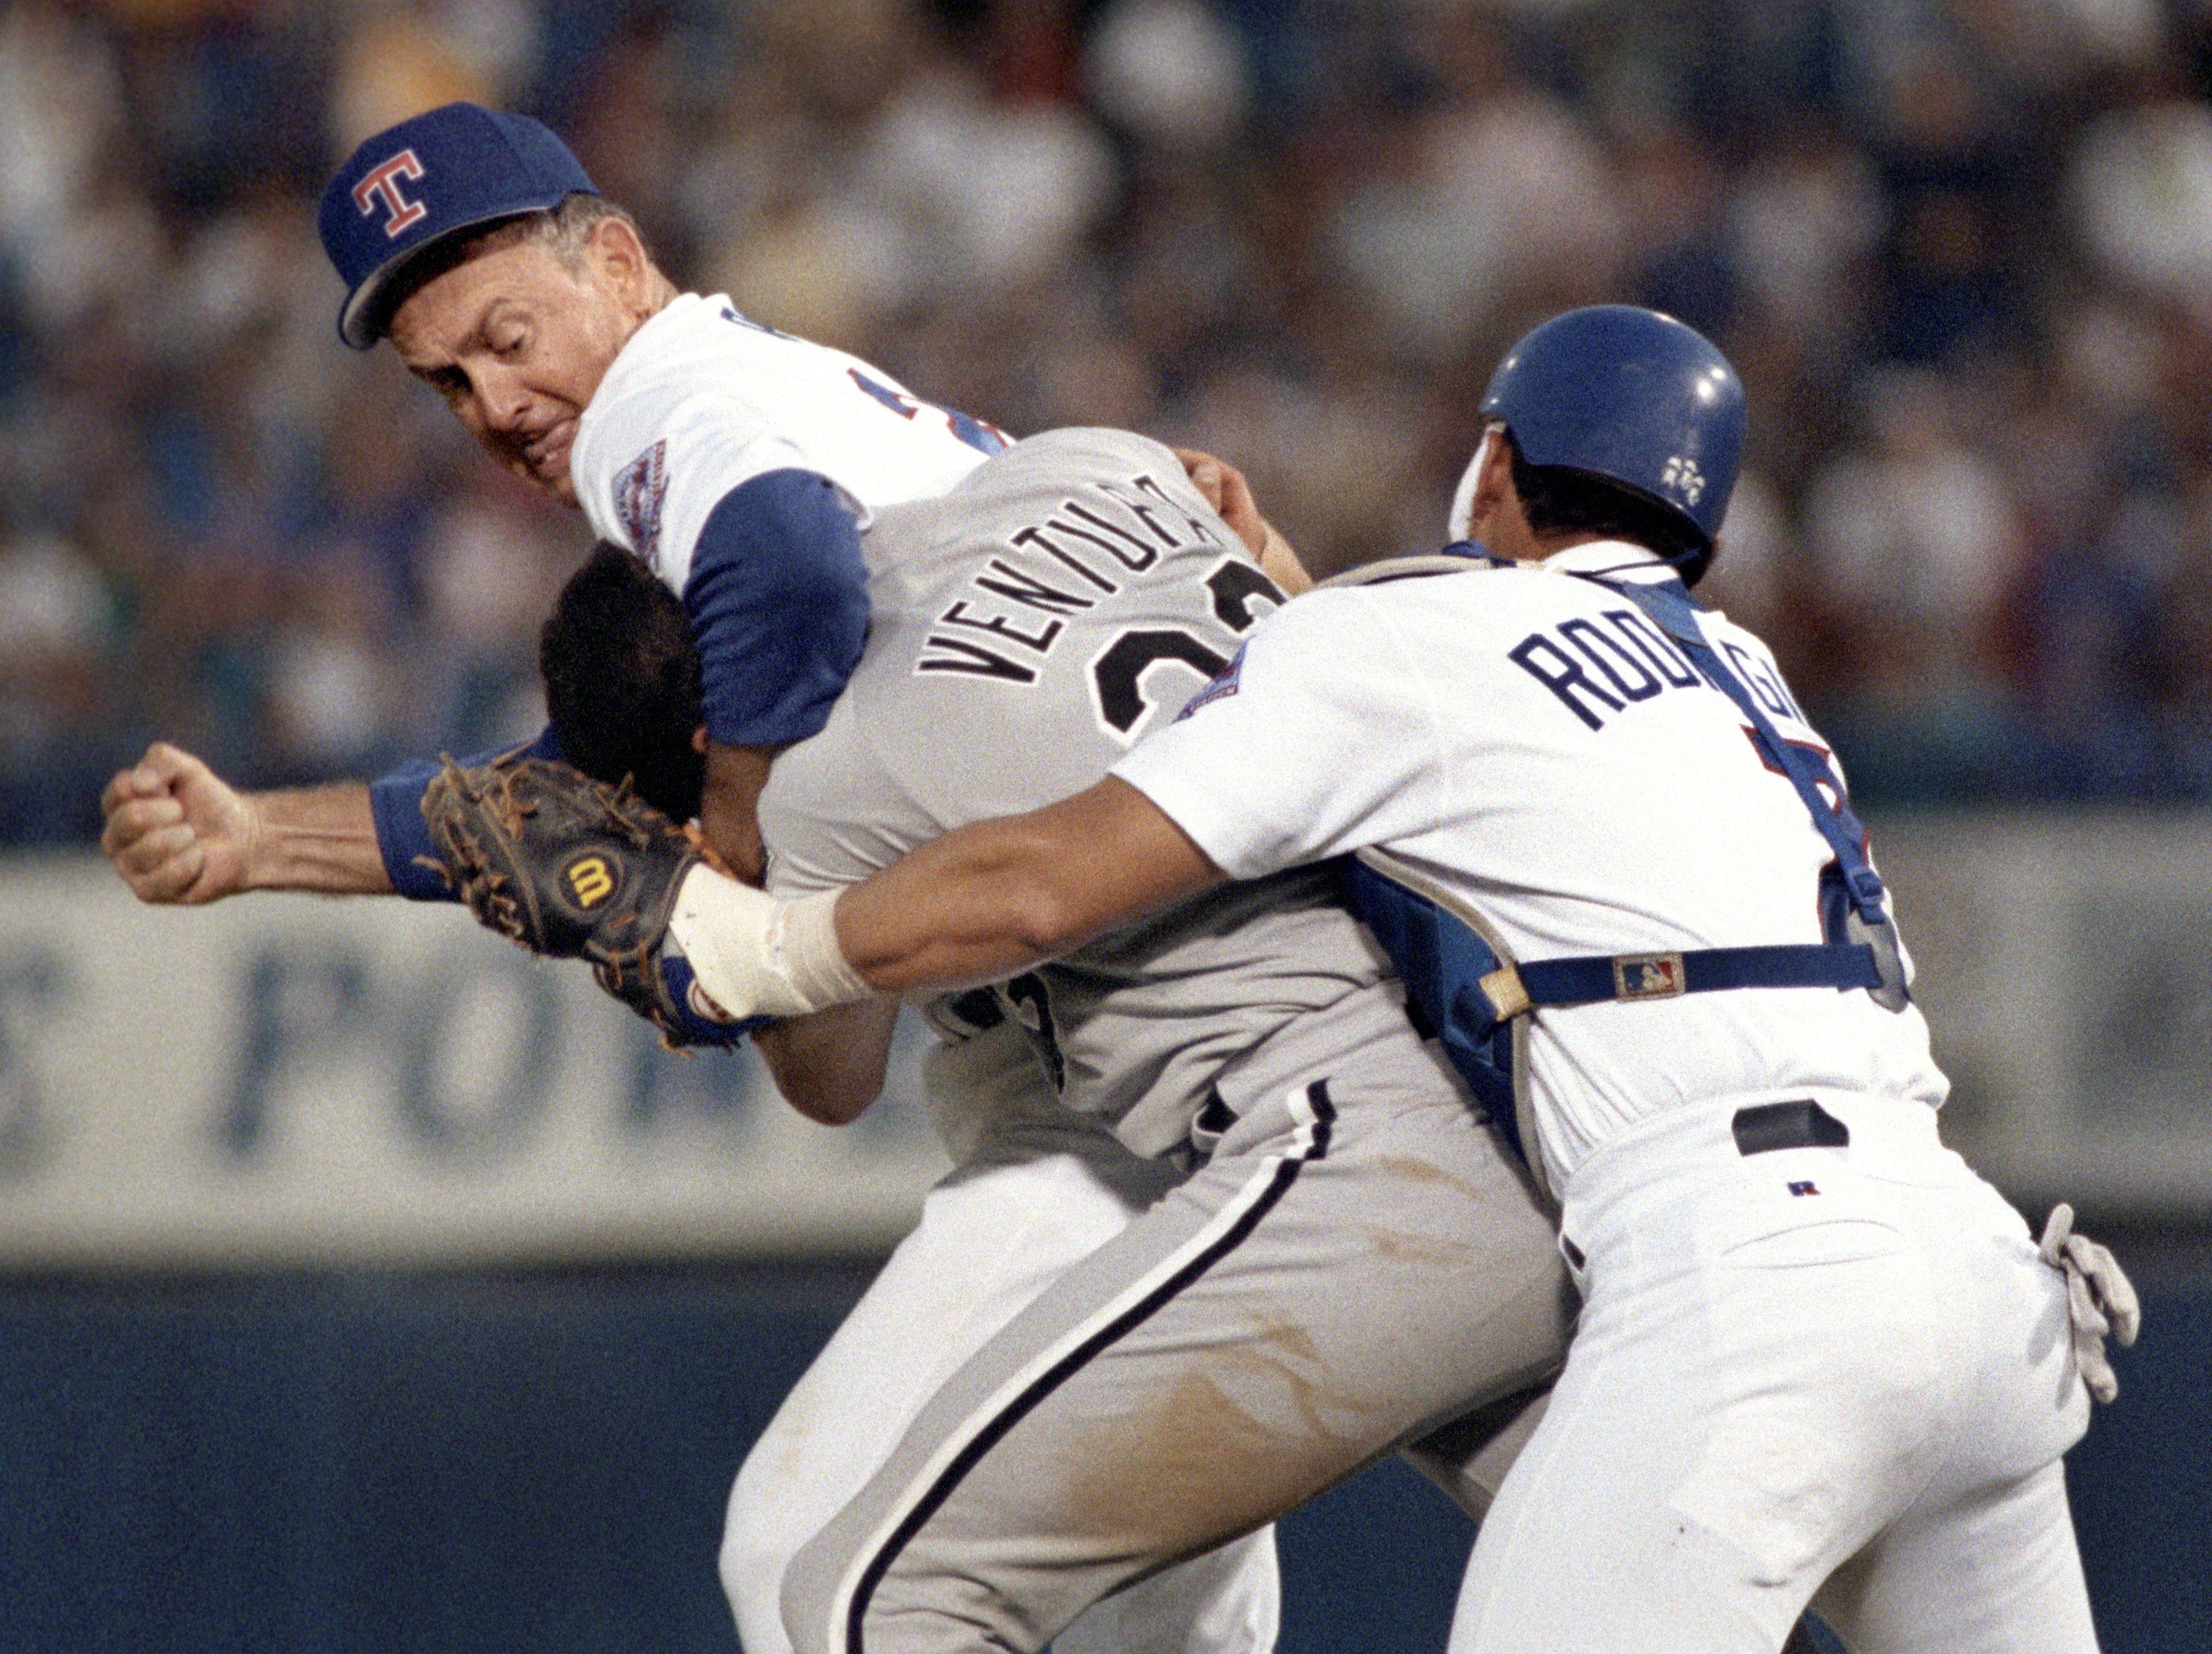 Texas Rangers Nolan Ryan Don't Mess With Texas The Fight On The